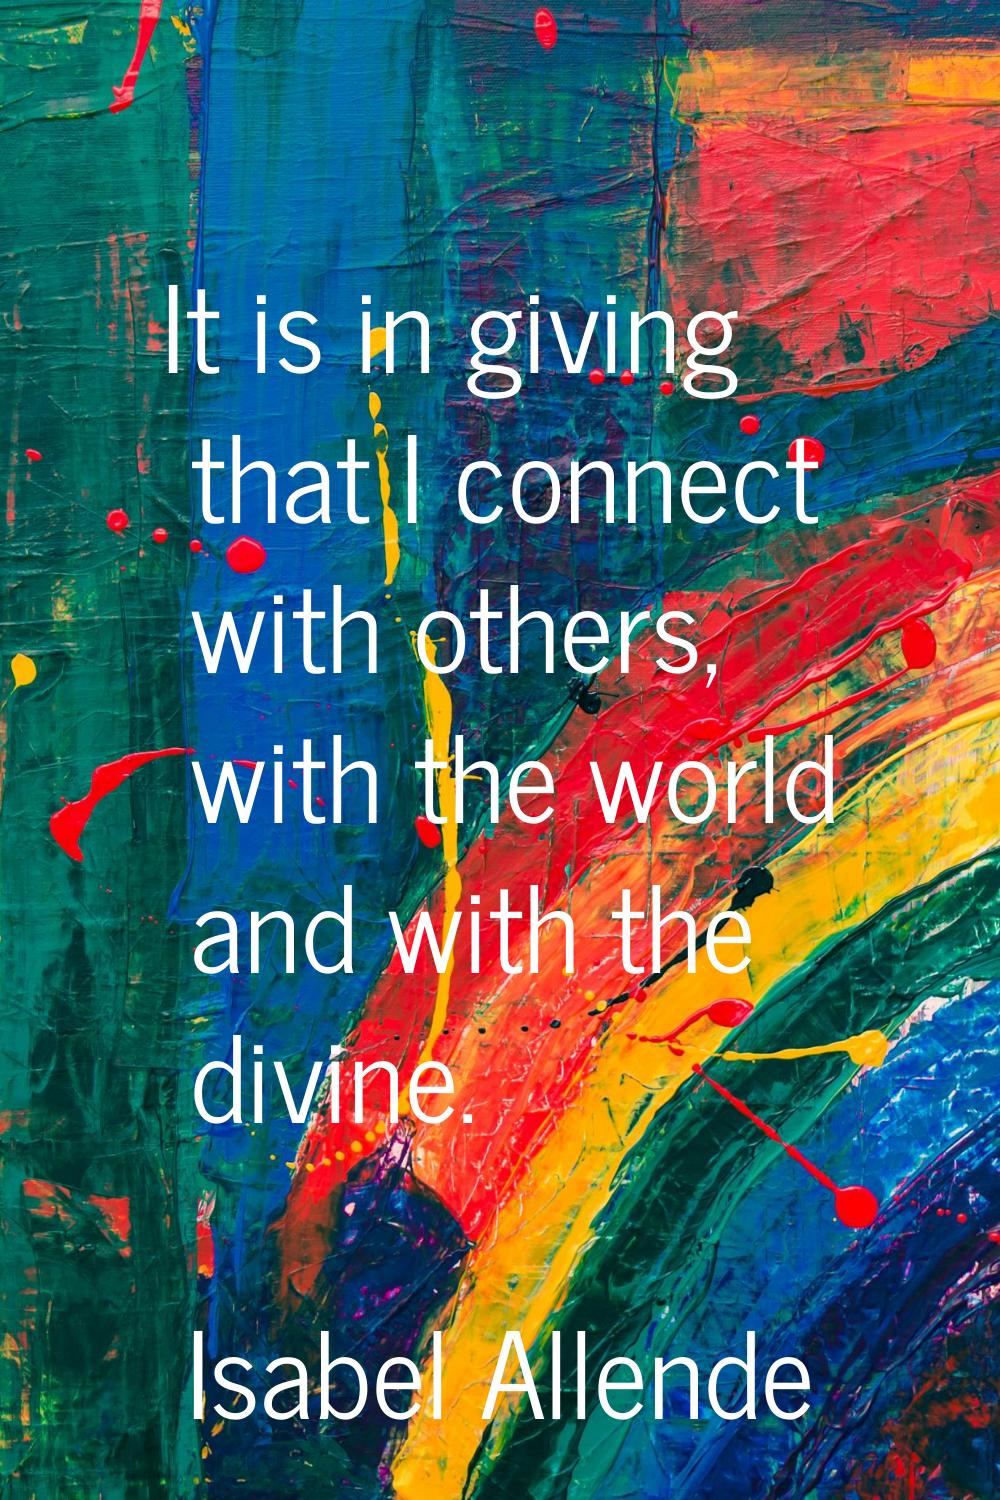 It is in giving that I connect with others, with the world and with the divine.